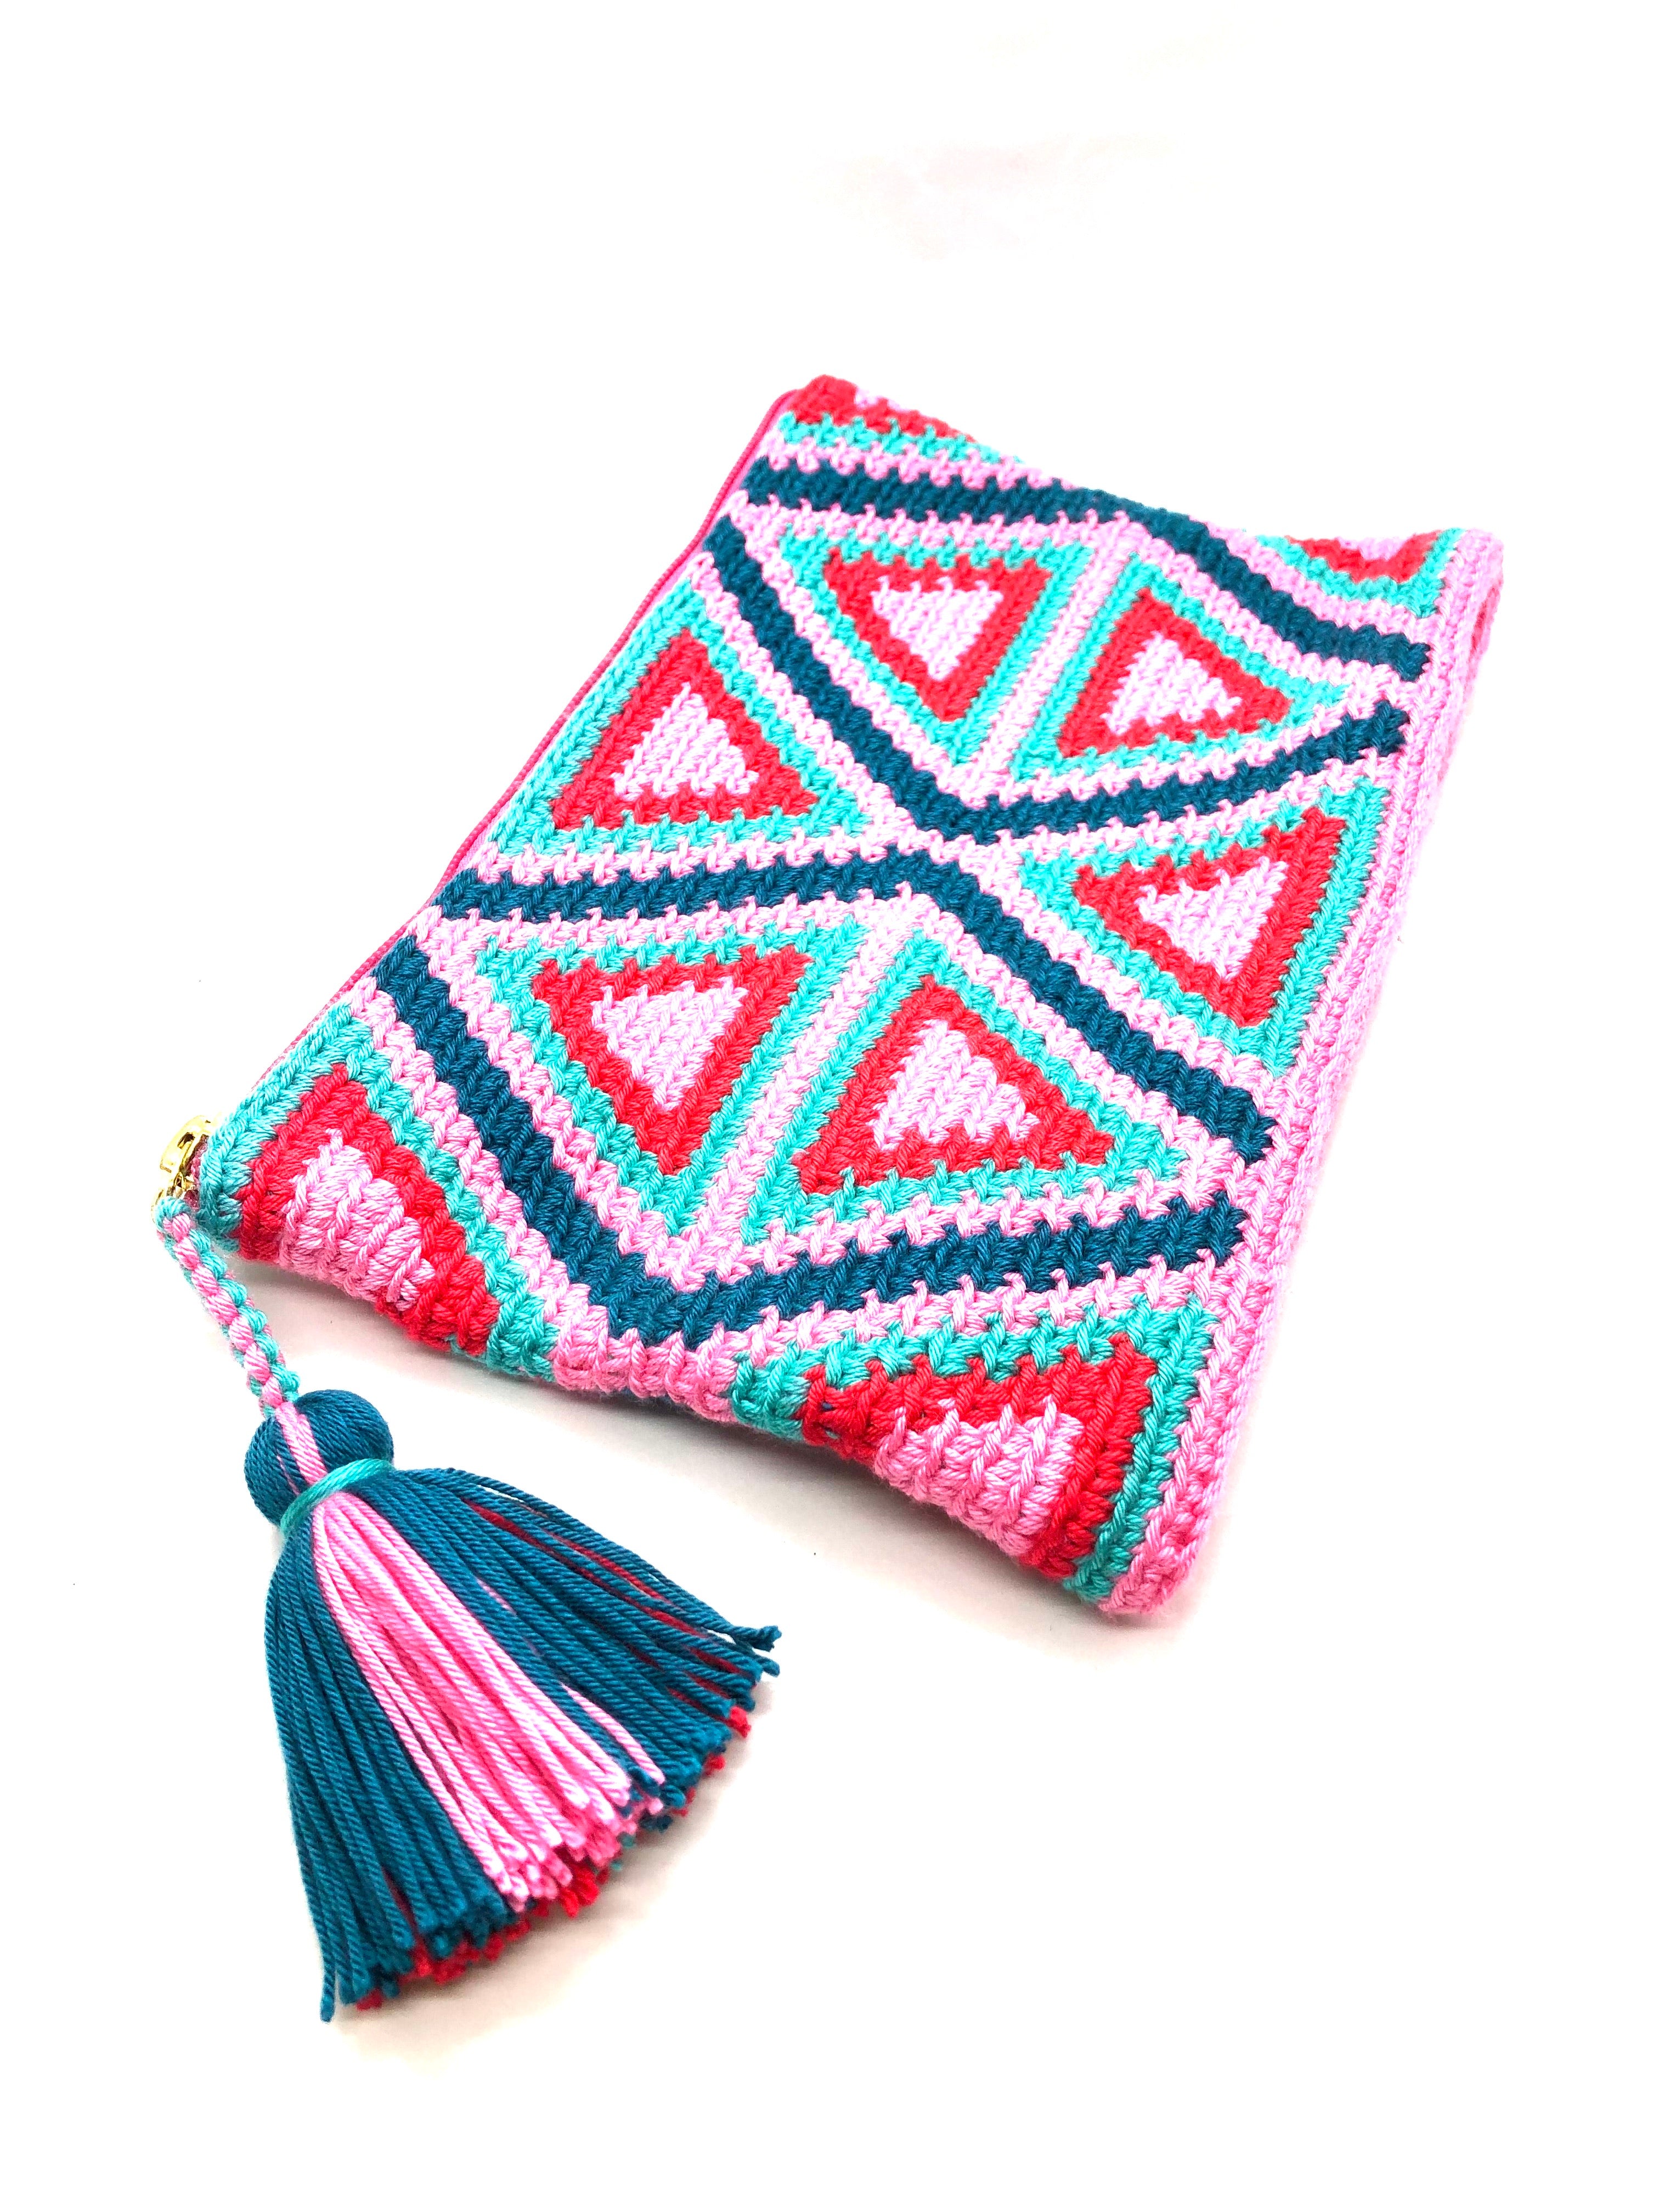 Clutch, with red, pink, turquoise and petrol triangle pattern with tassel.